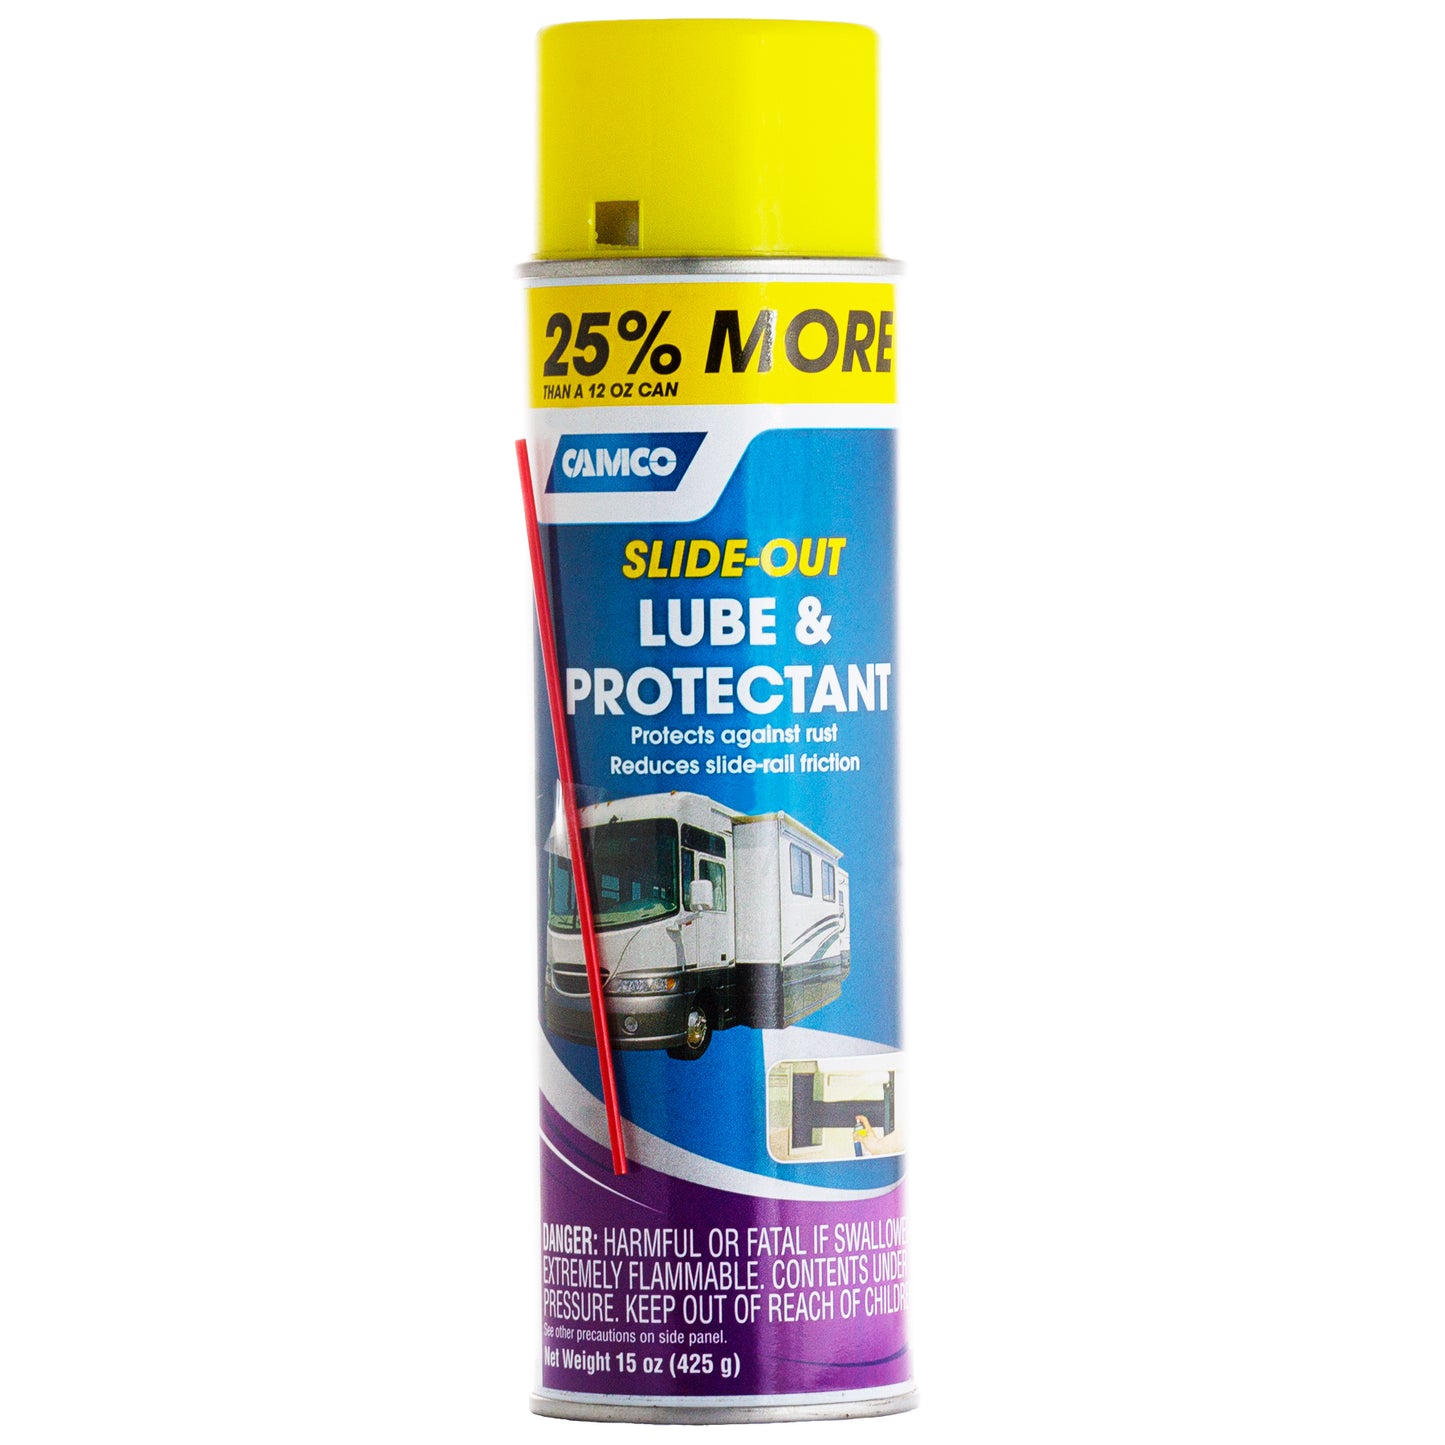 SLIDE-OUT LUBE & PROTECTANT